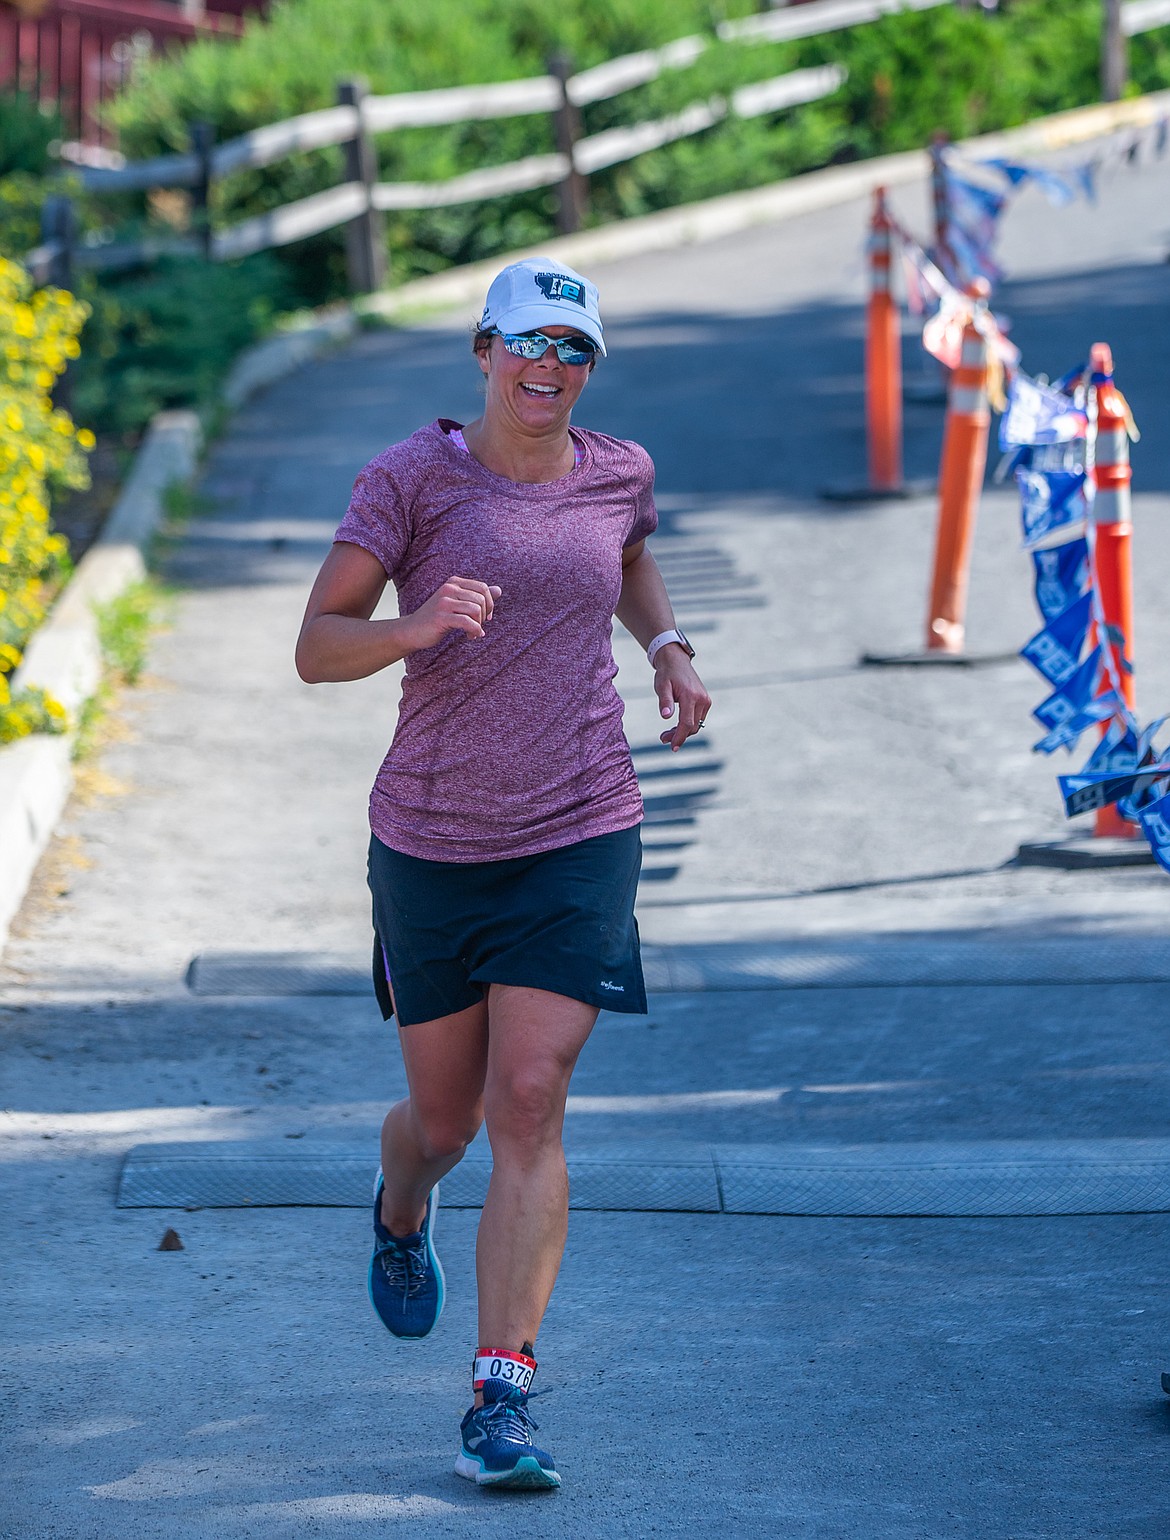 Carrie Jacobs of Whitefish crosses the finish line during the Whitefish Lake Triathlon on Sunday. (Daniel McKay/Whitefish Pilot)